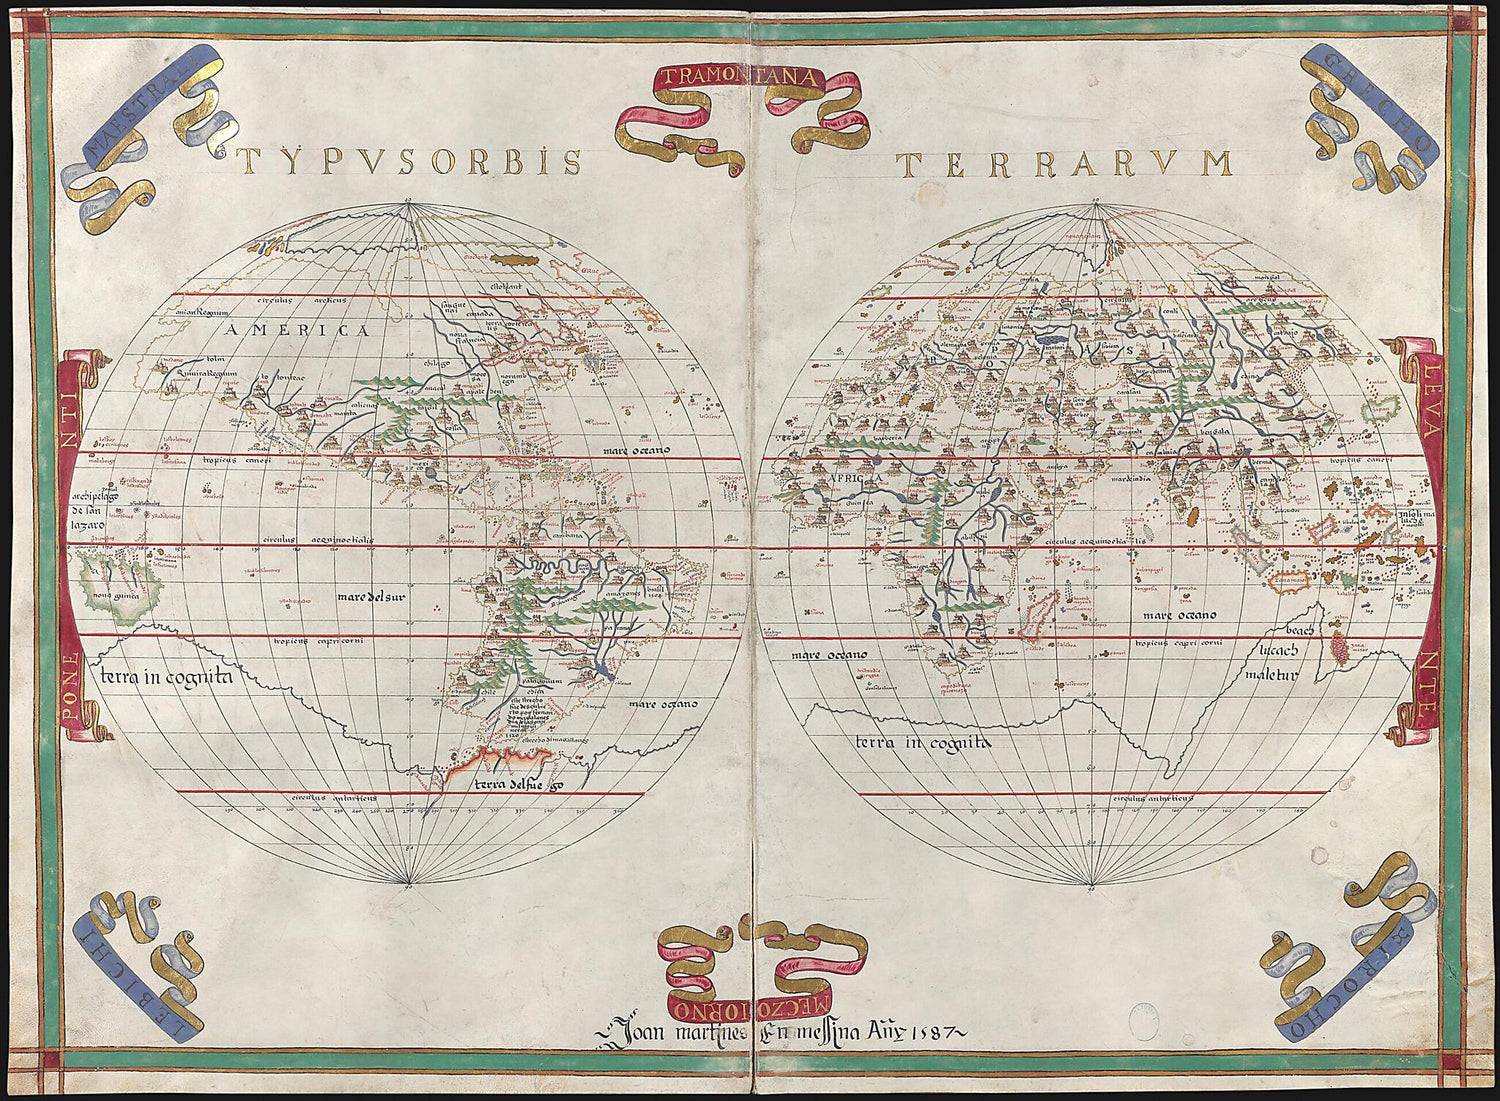 This old map of Atlas of Joan Martines. (Atlas De Joan Martines) from 1587 was created by Joan Martines in 1587